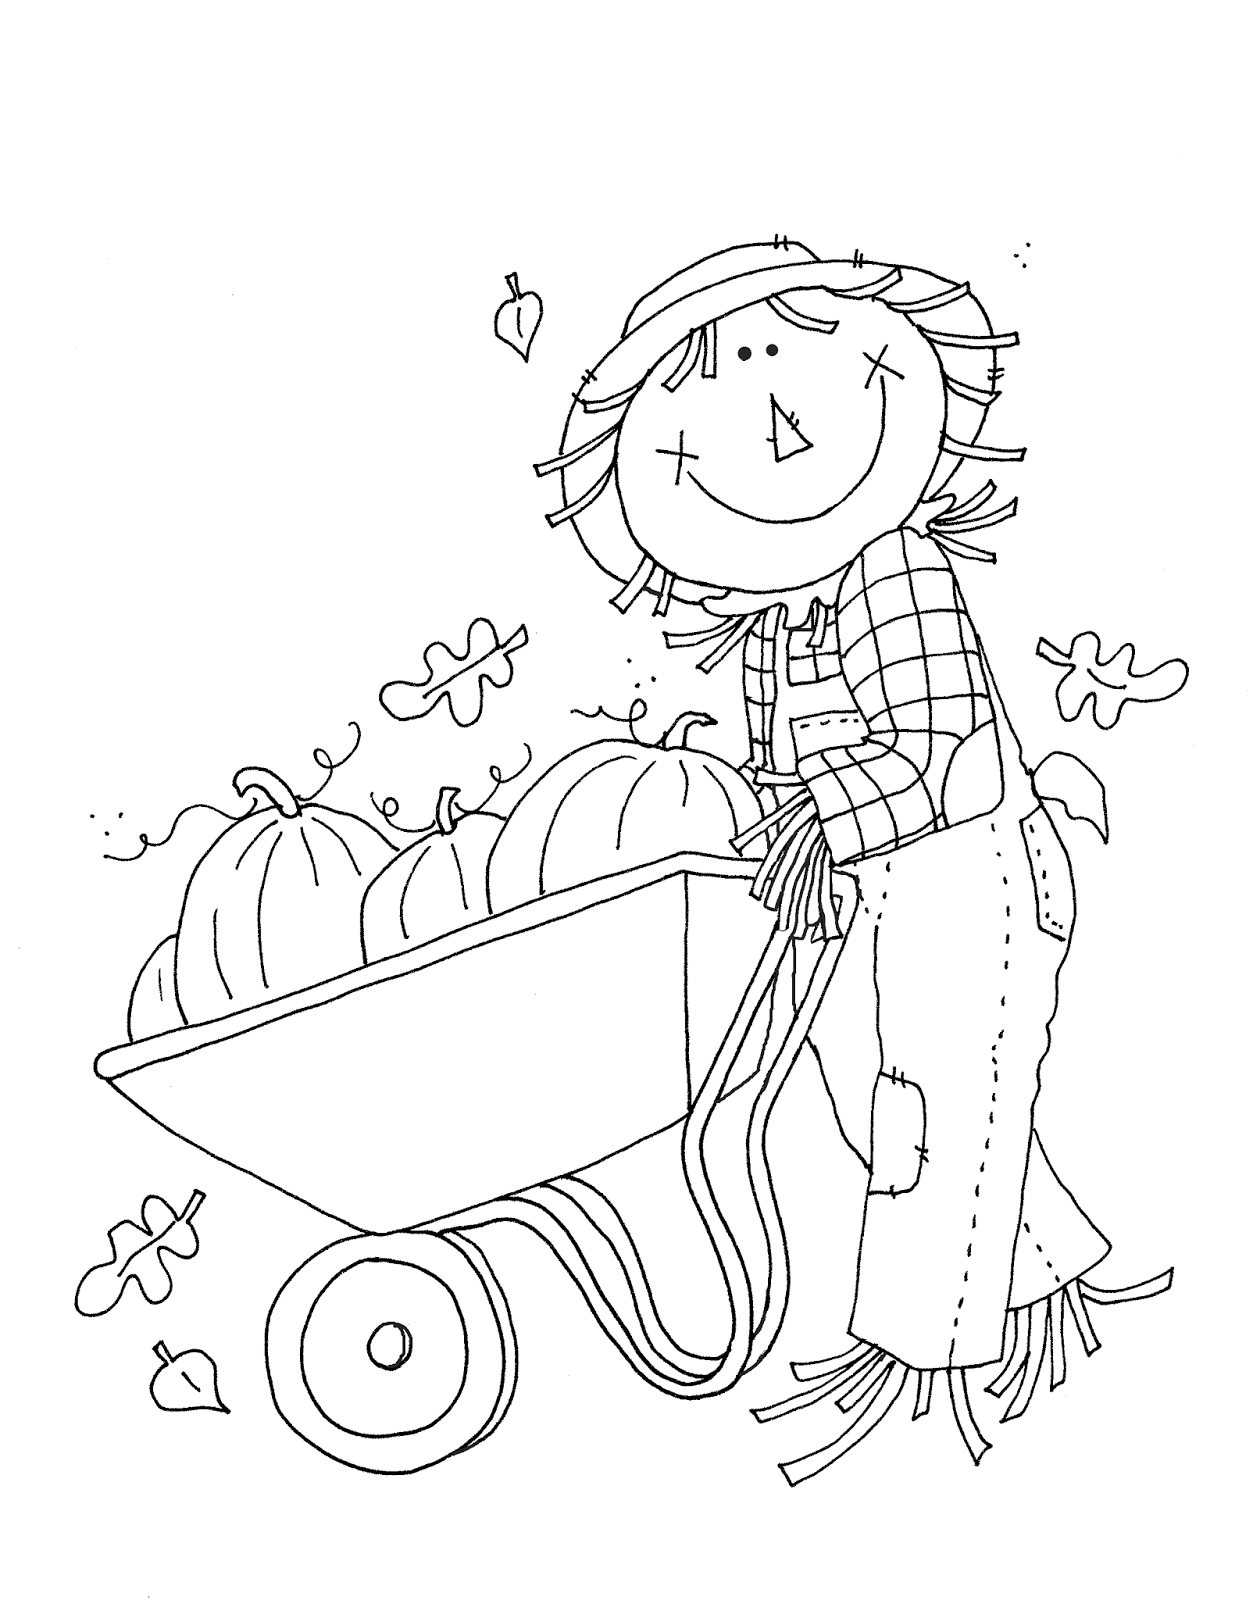 Pin by Pamela Smith on Digi Stamps | Fall coloring pages, Digi stamps,  Pumpkin coloring pages